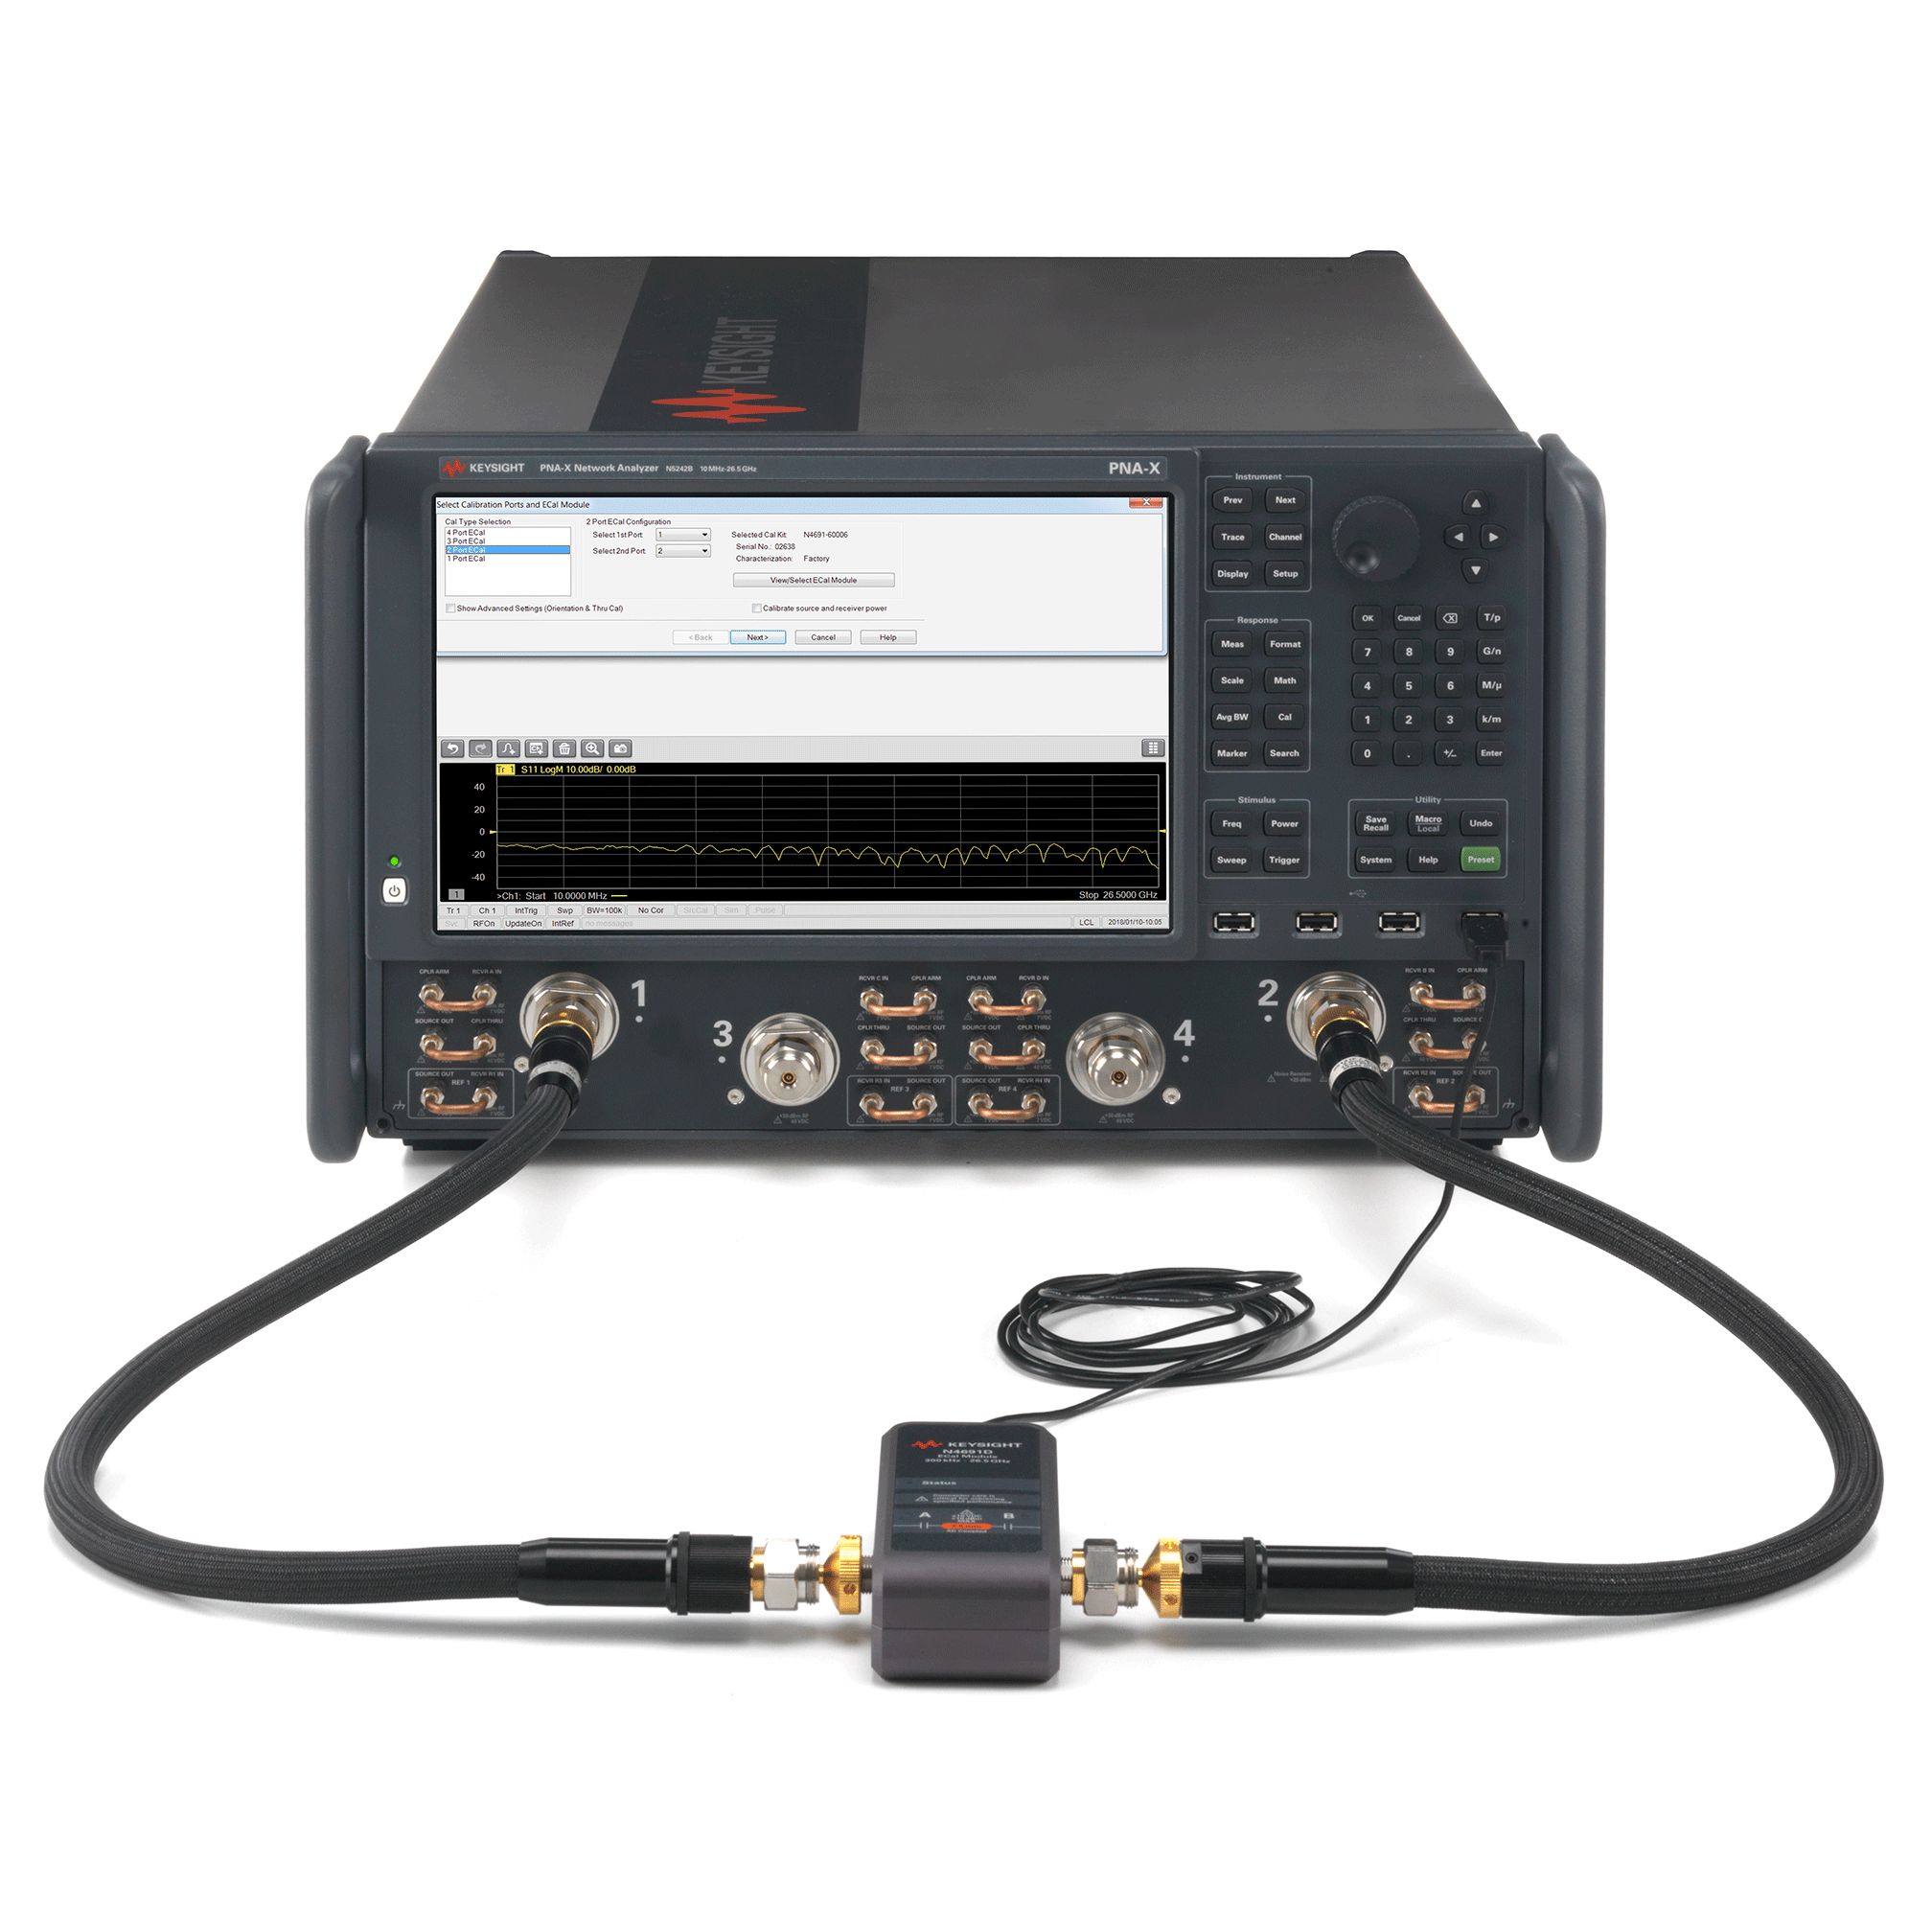 Picture of a Keysight Technologies N4692D